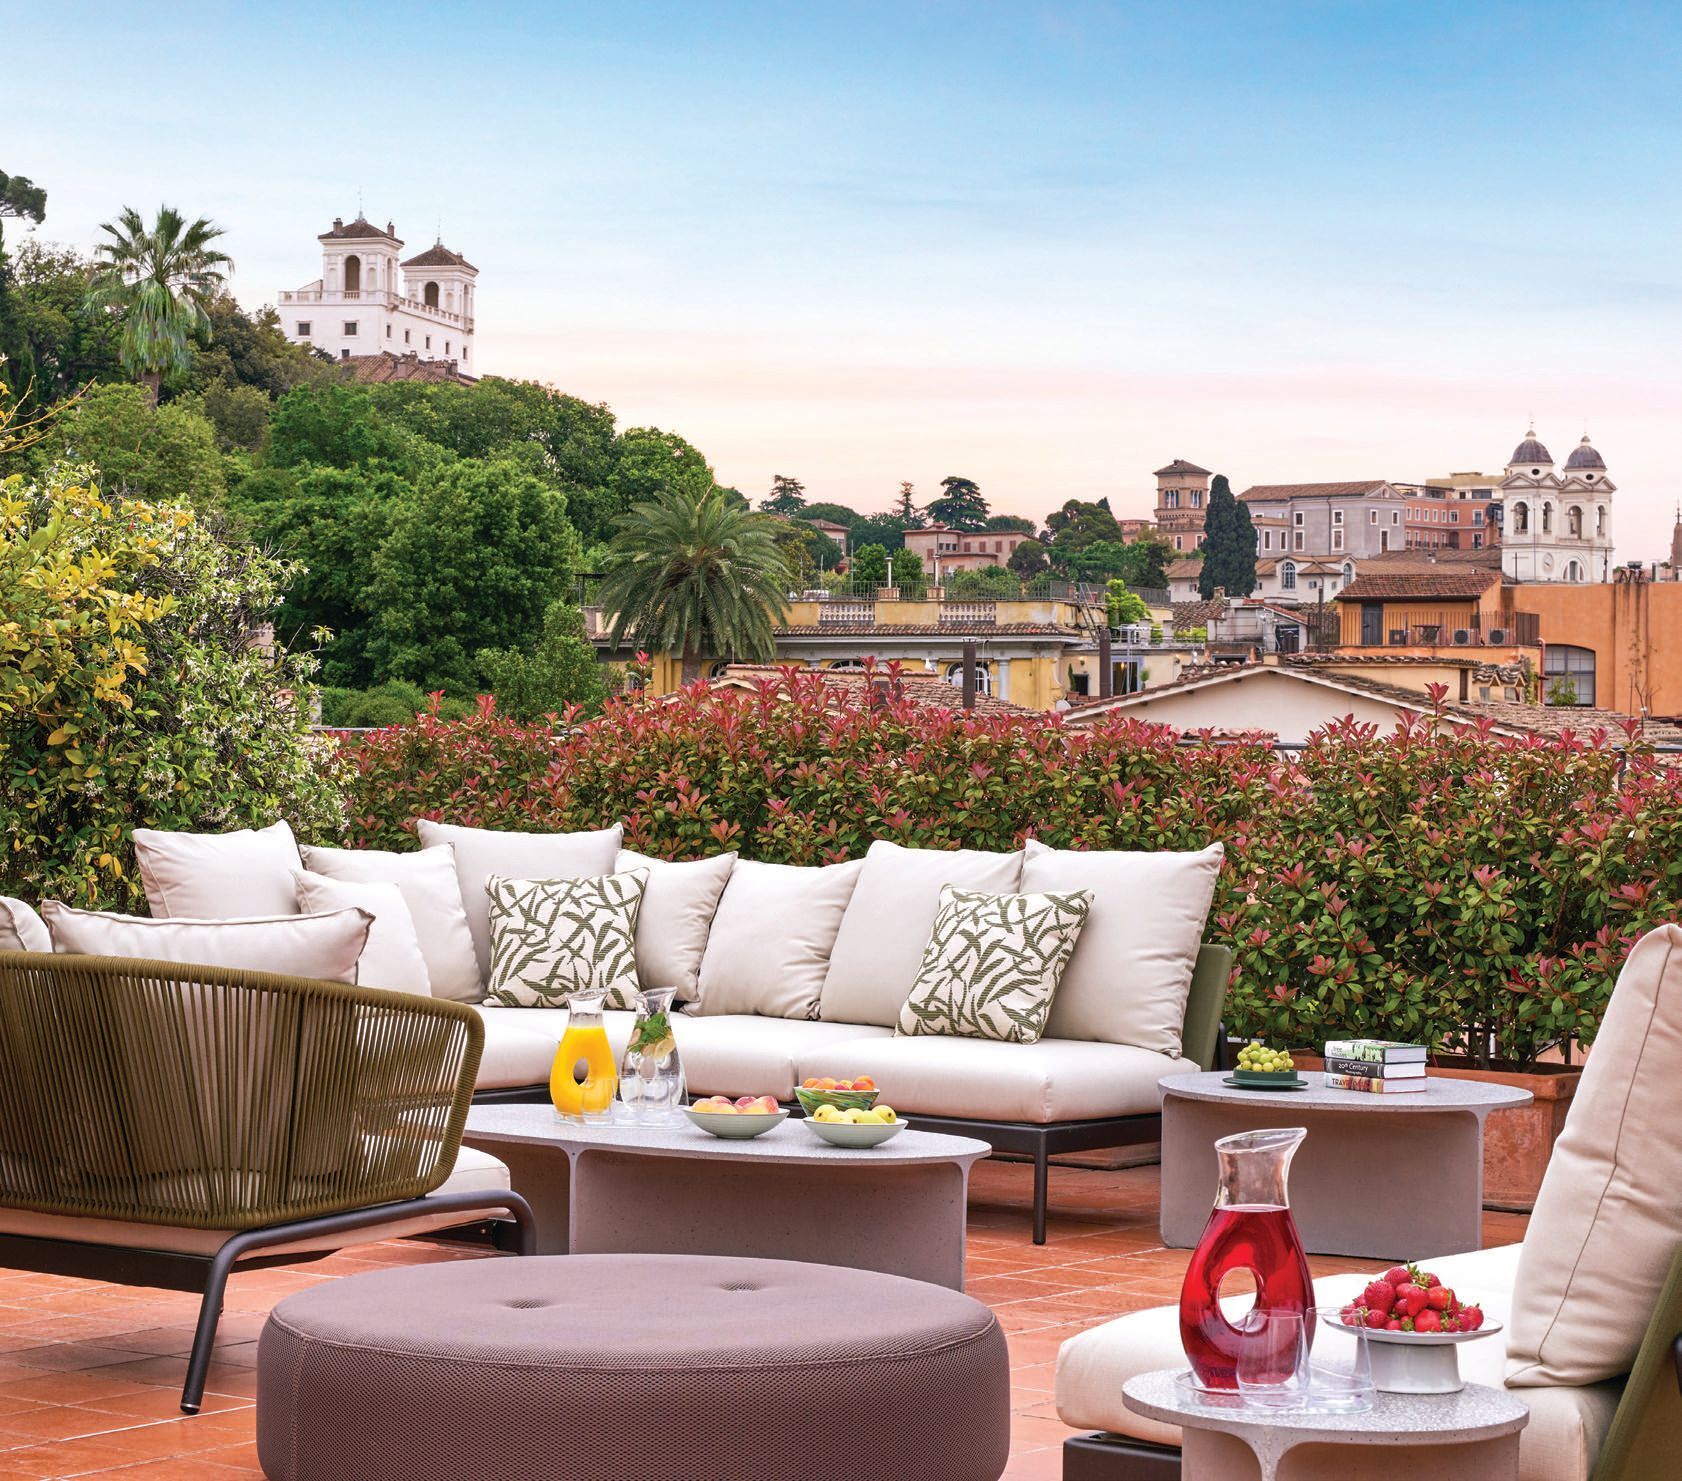 Rome Re-Imagines Itself At The Iconic Hotel de Russie